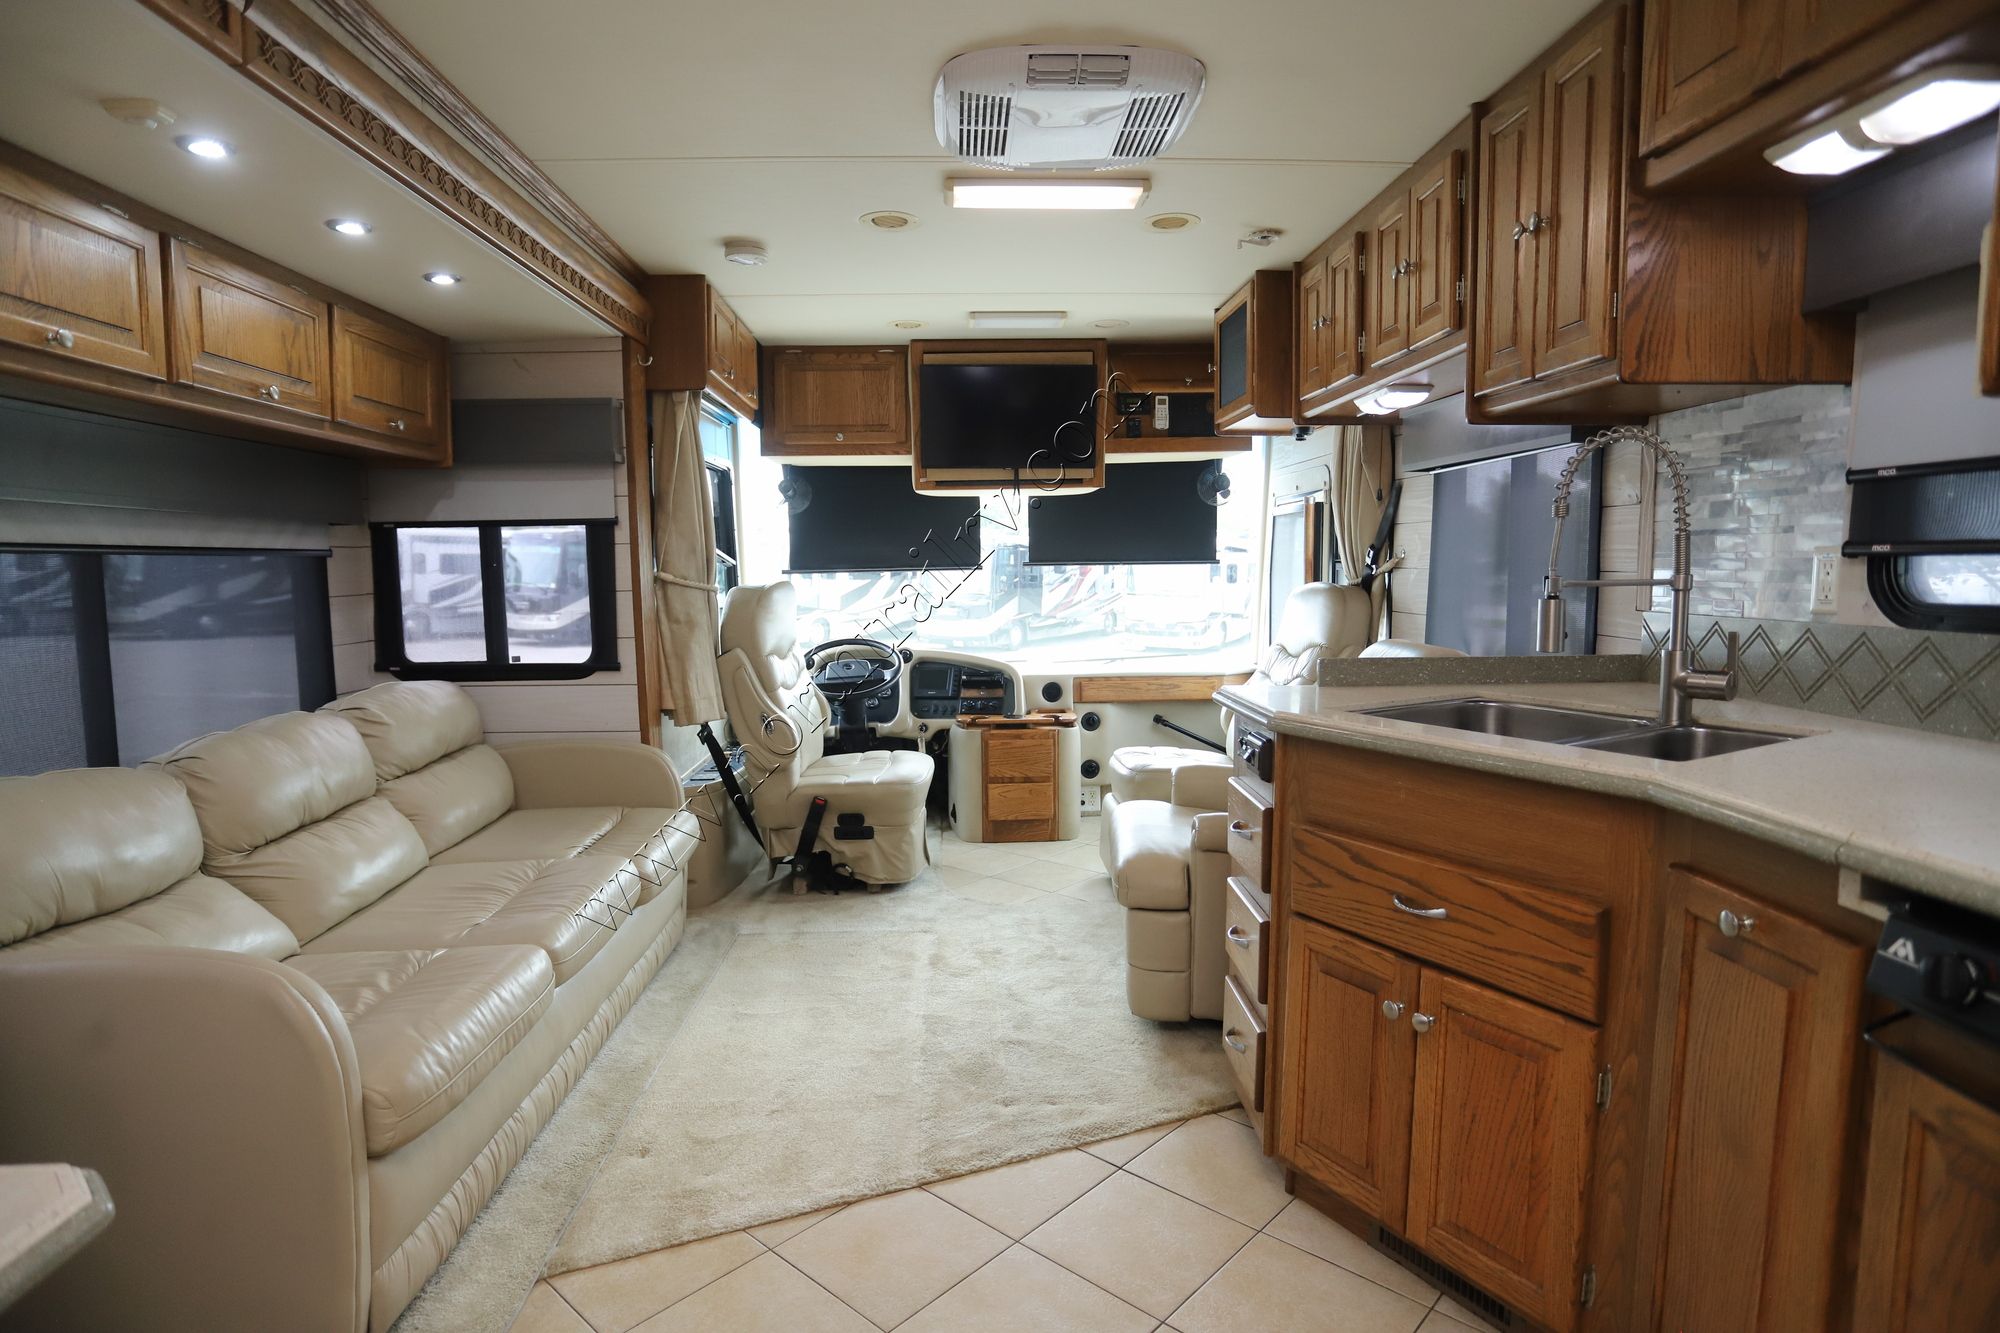 Used 2006 Tiffin Motor Homes Phaeton 35DH Class A  For Sale